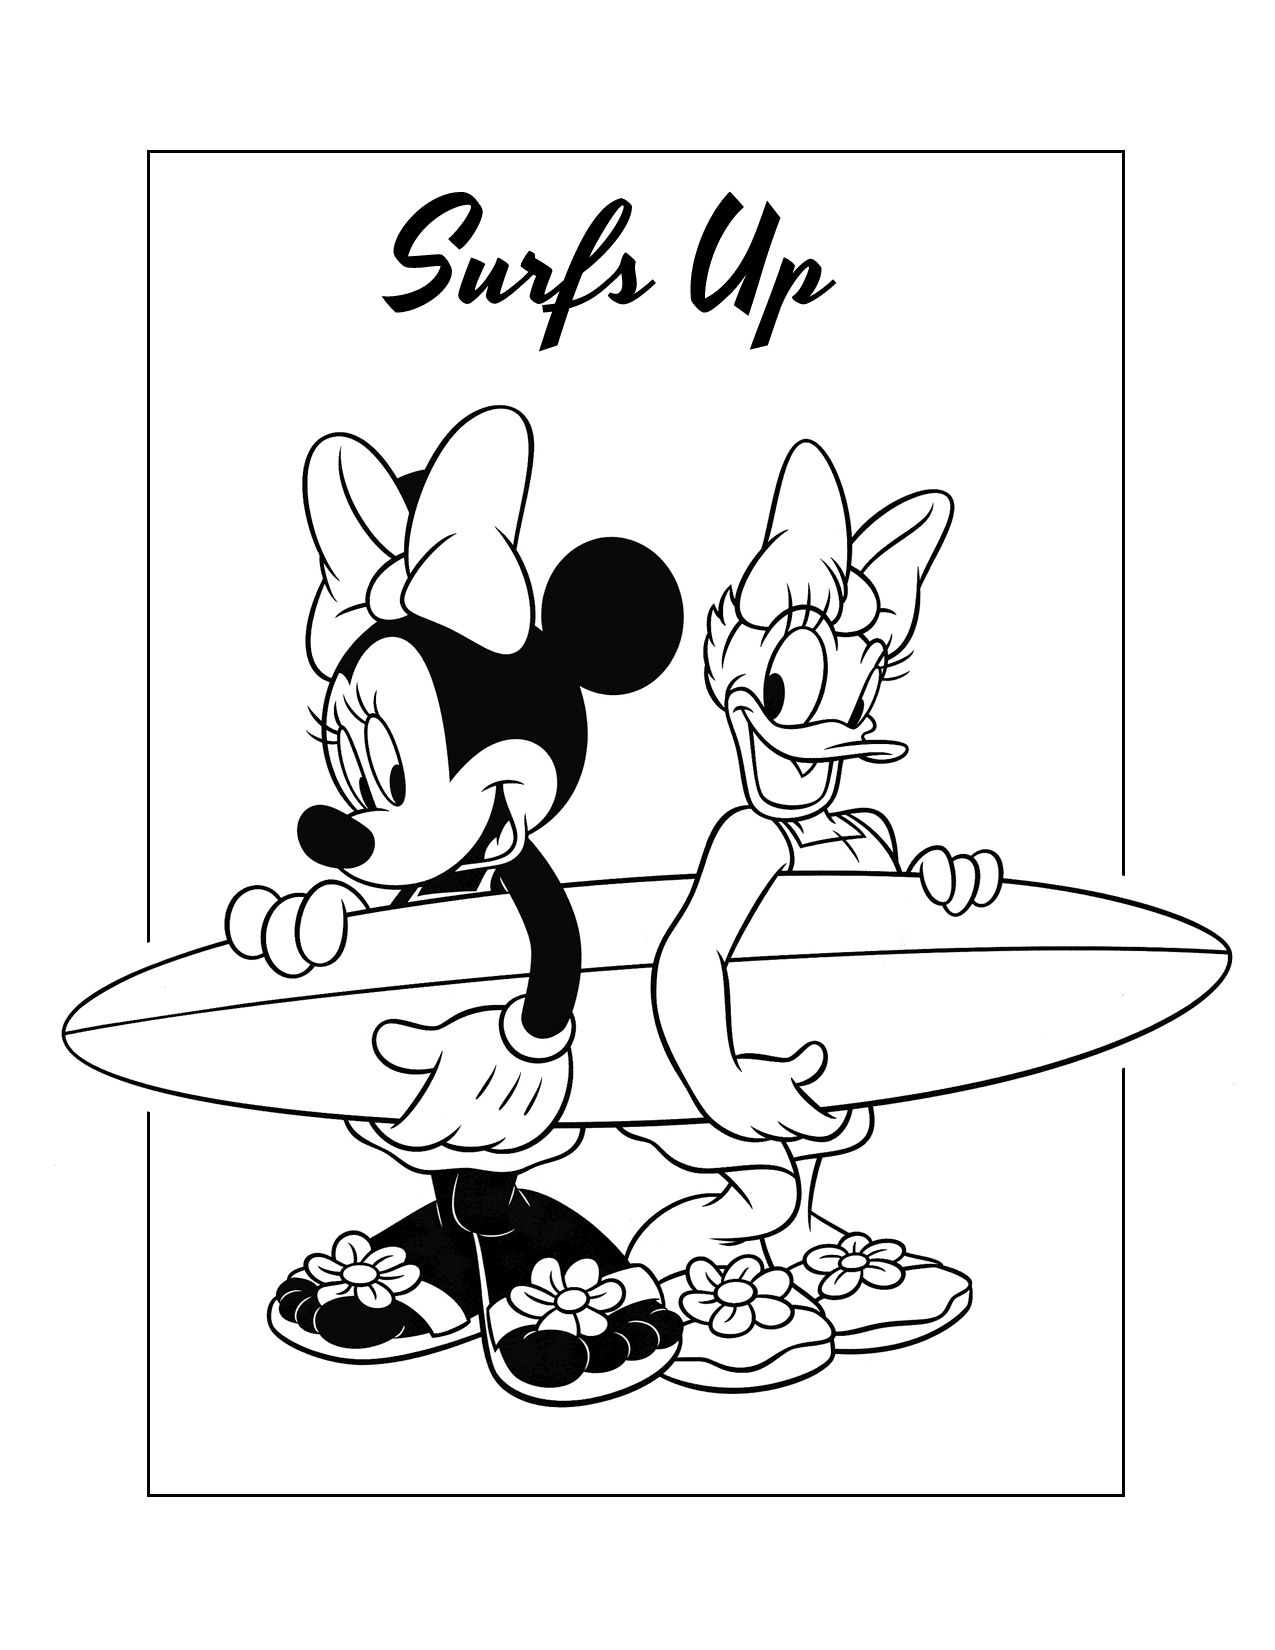 Minnie Mouse And Daisy Duck With Surfboard Coloring Page